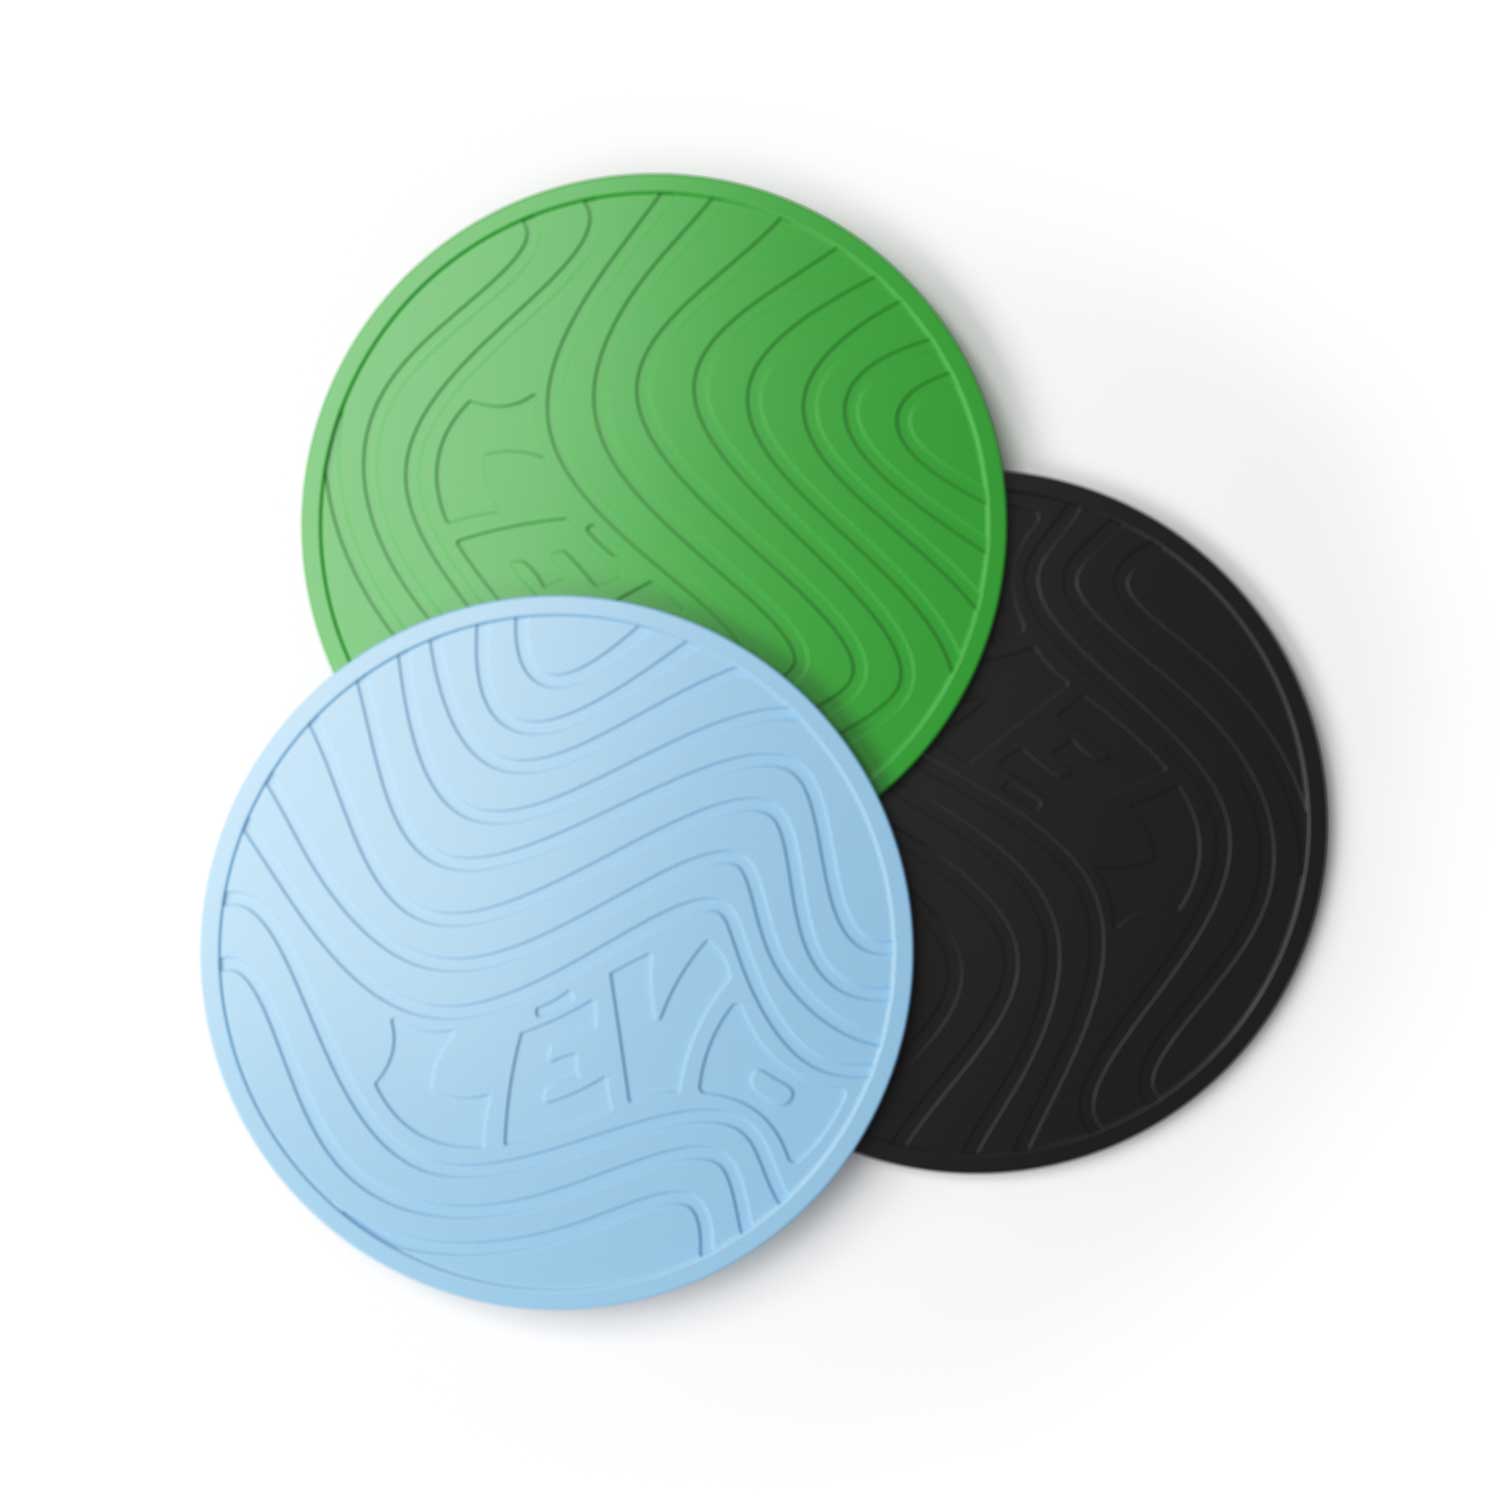 LEVO Silicone Trivets in green, blue, and black